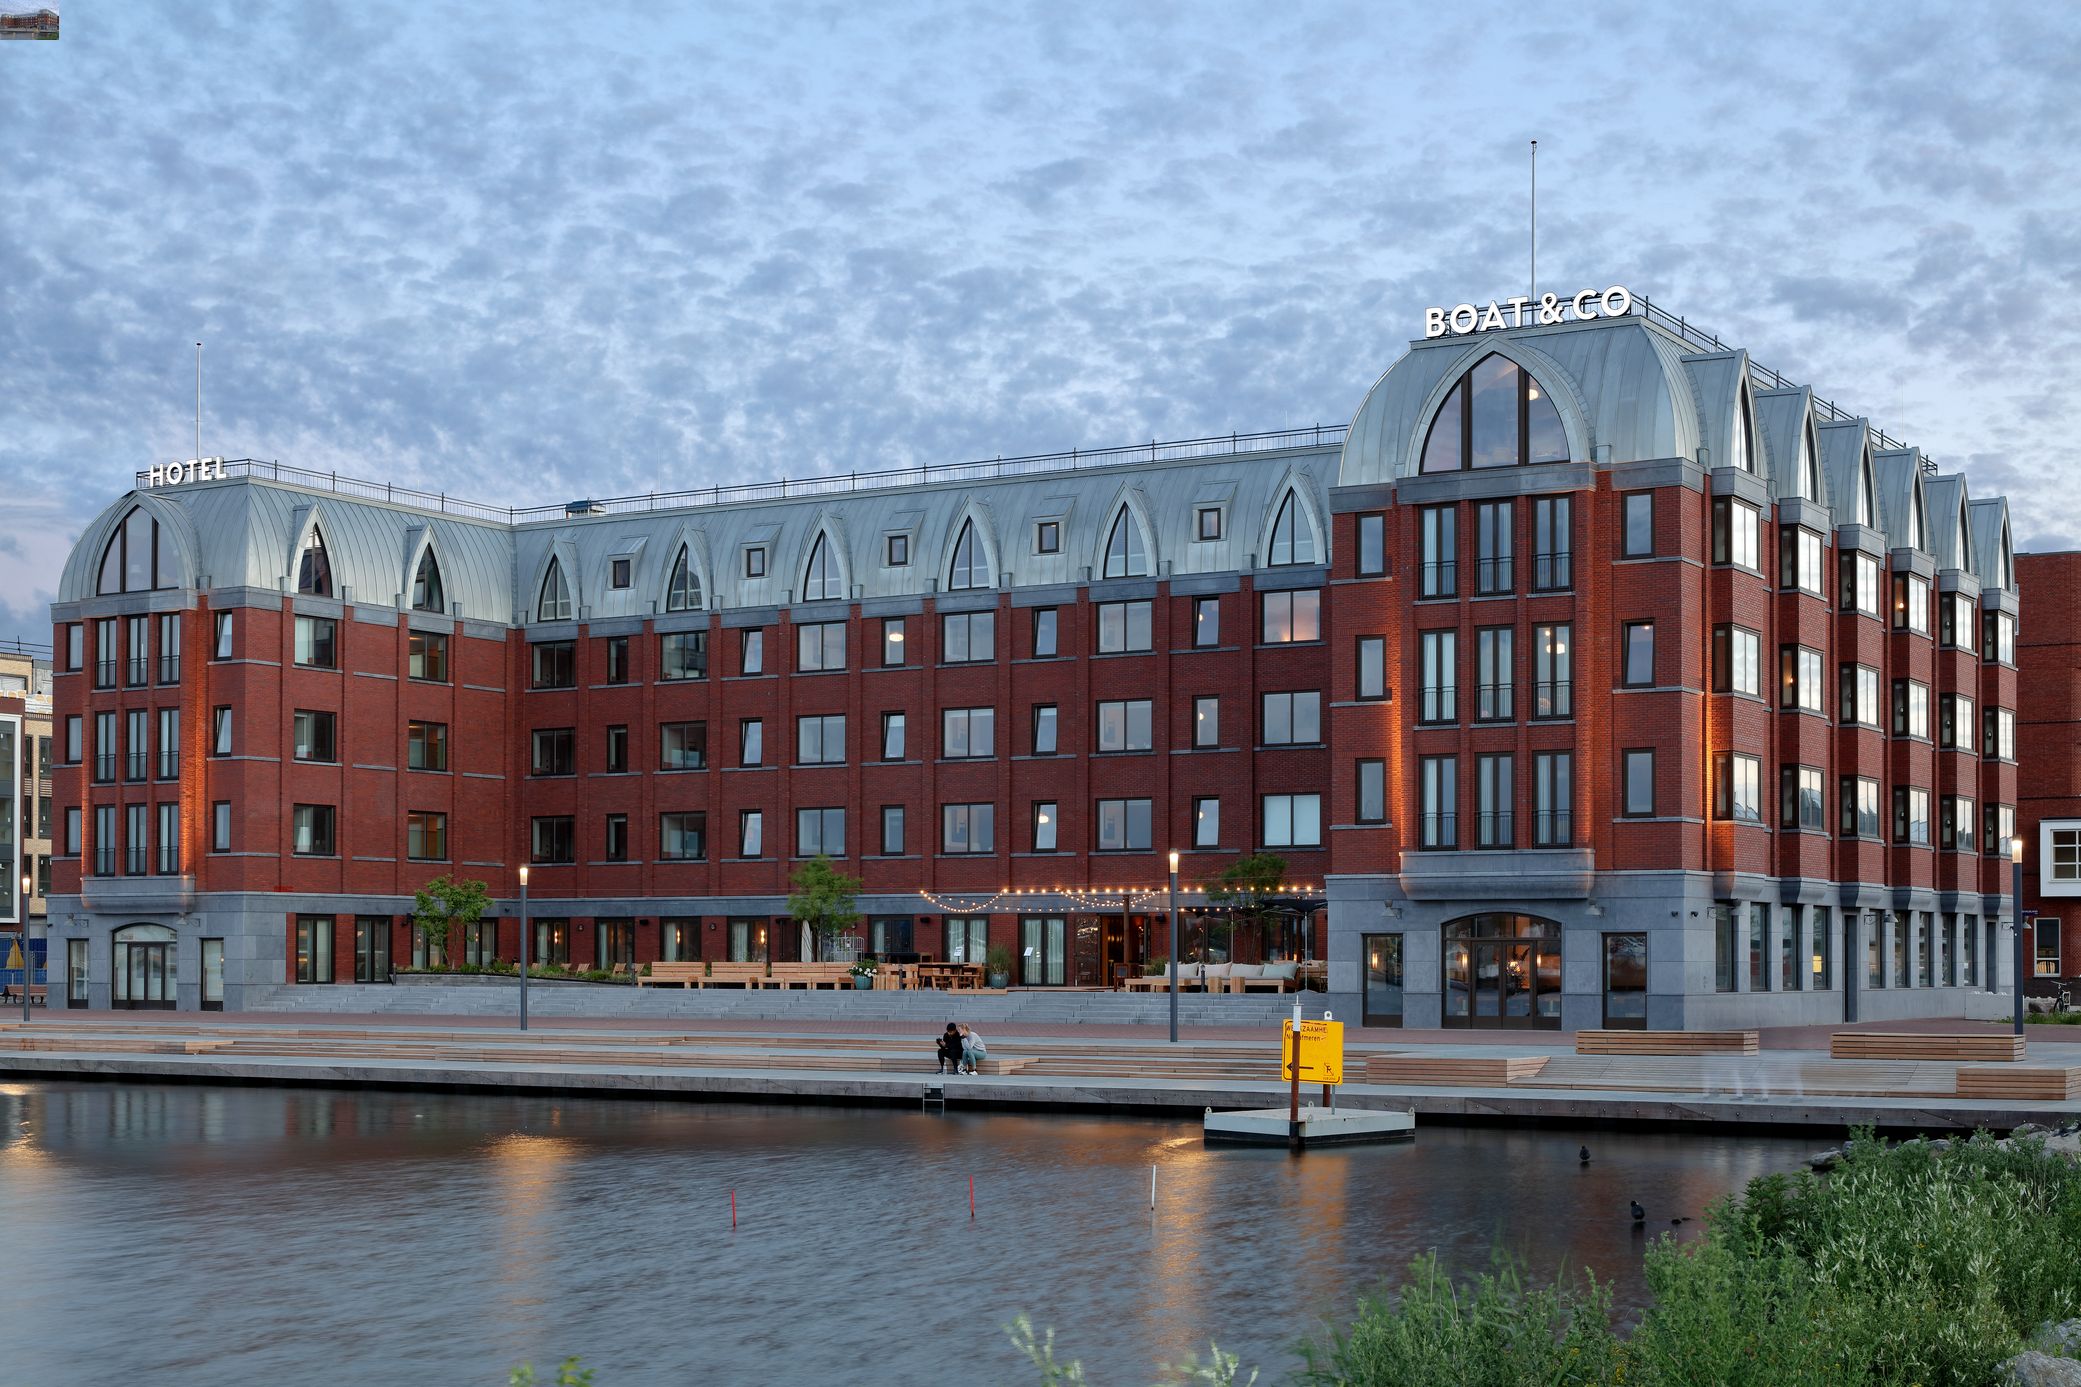 Hotel Boat & Co, Netherlands, C2C certified, roof: RHEINZINK-CLASSIC bright-rolled, double-standing-seam